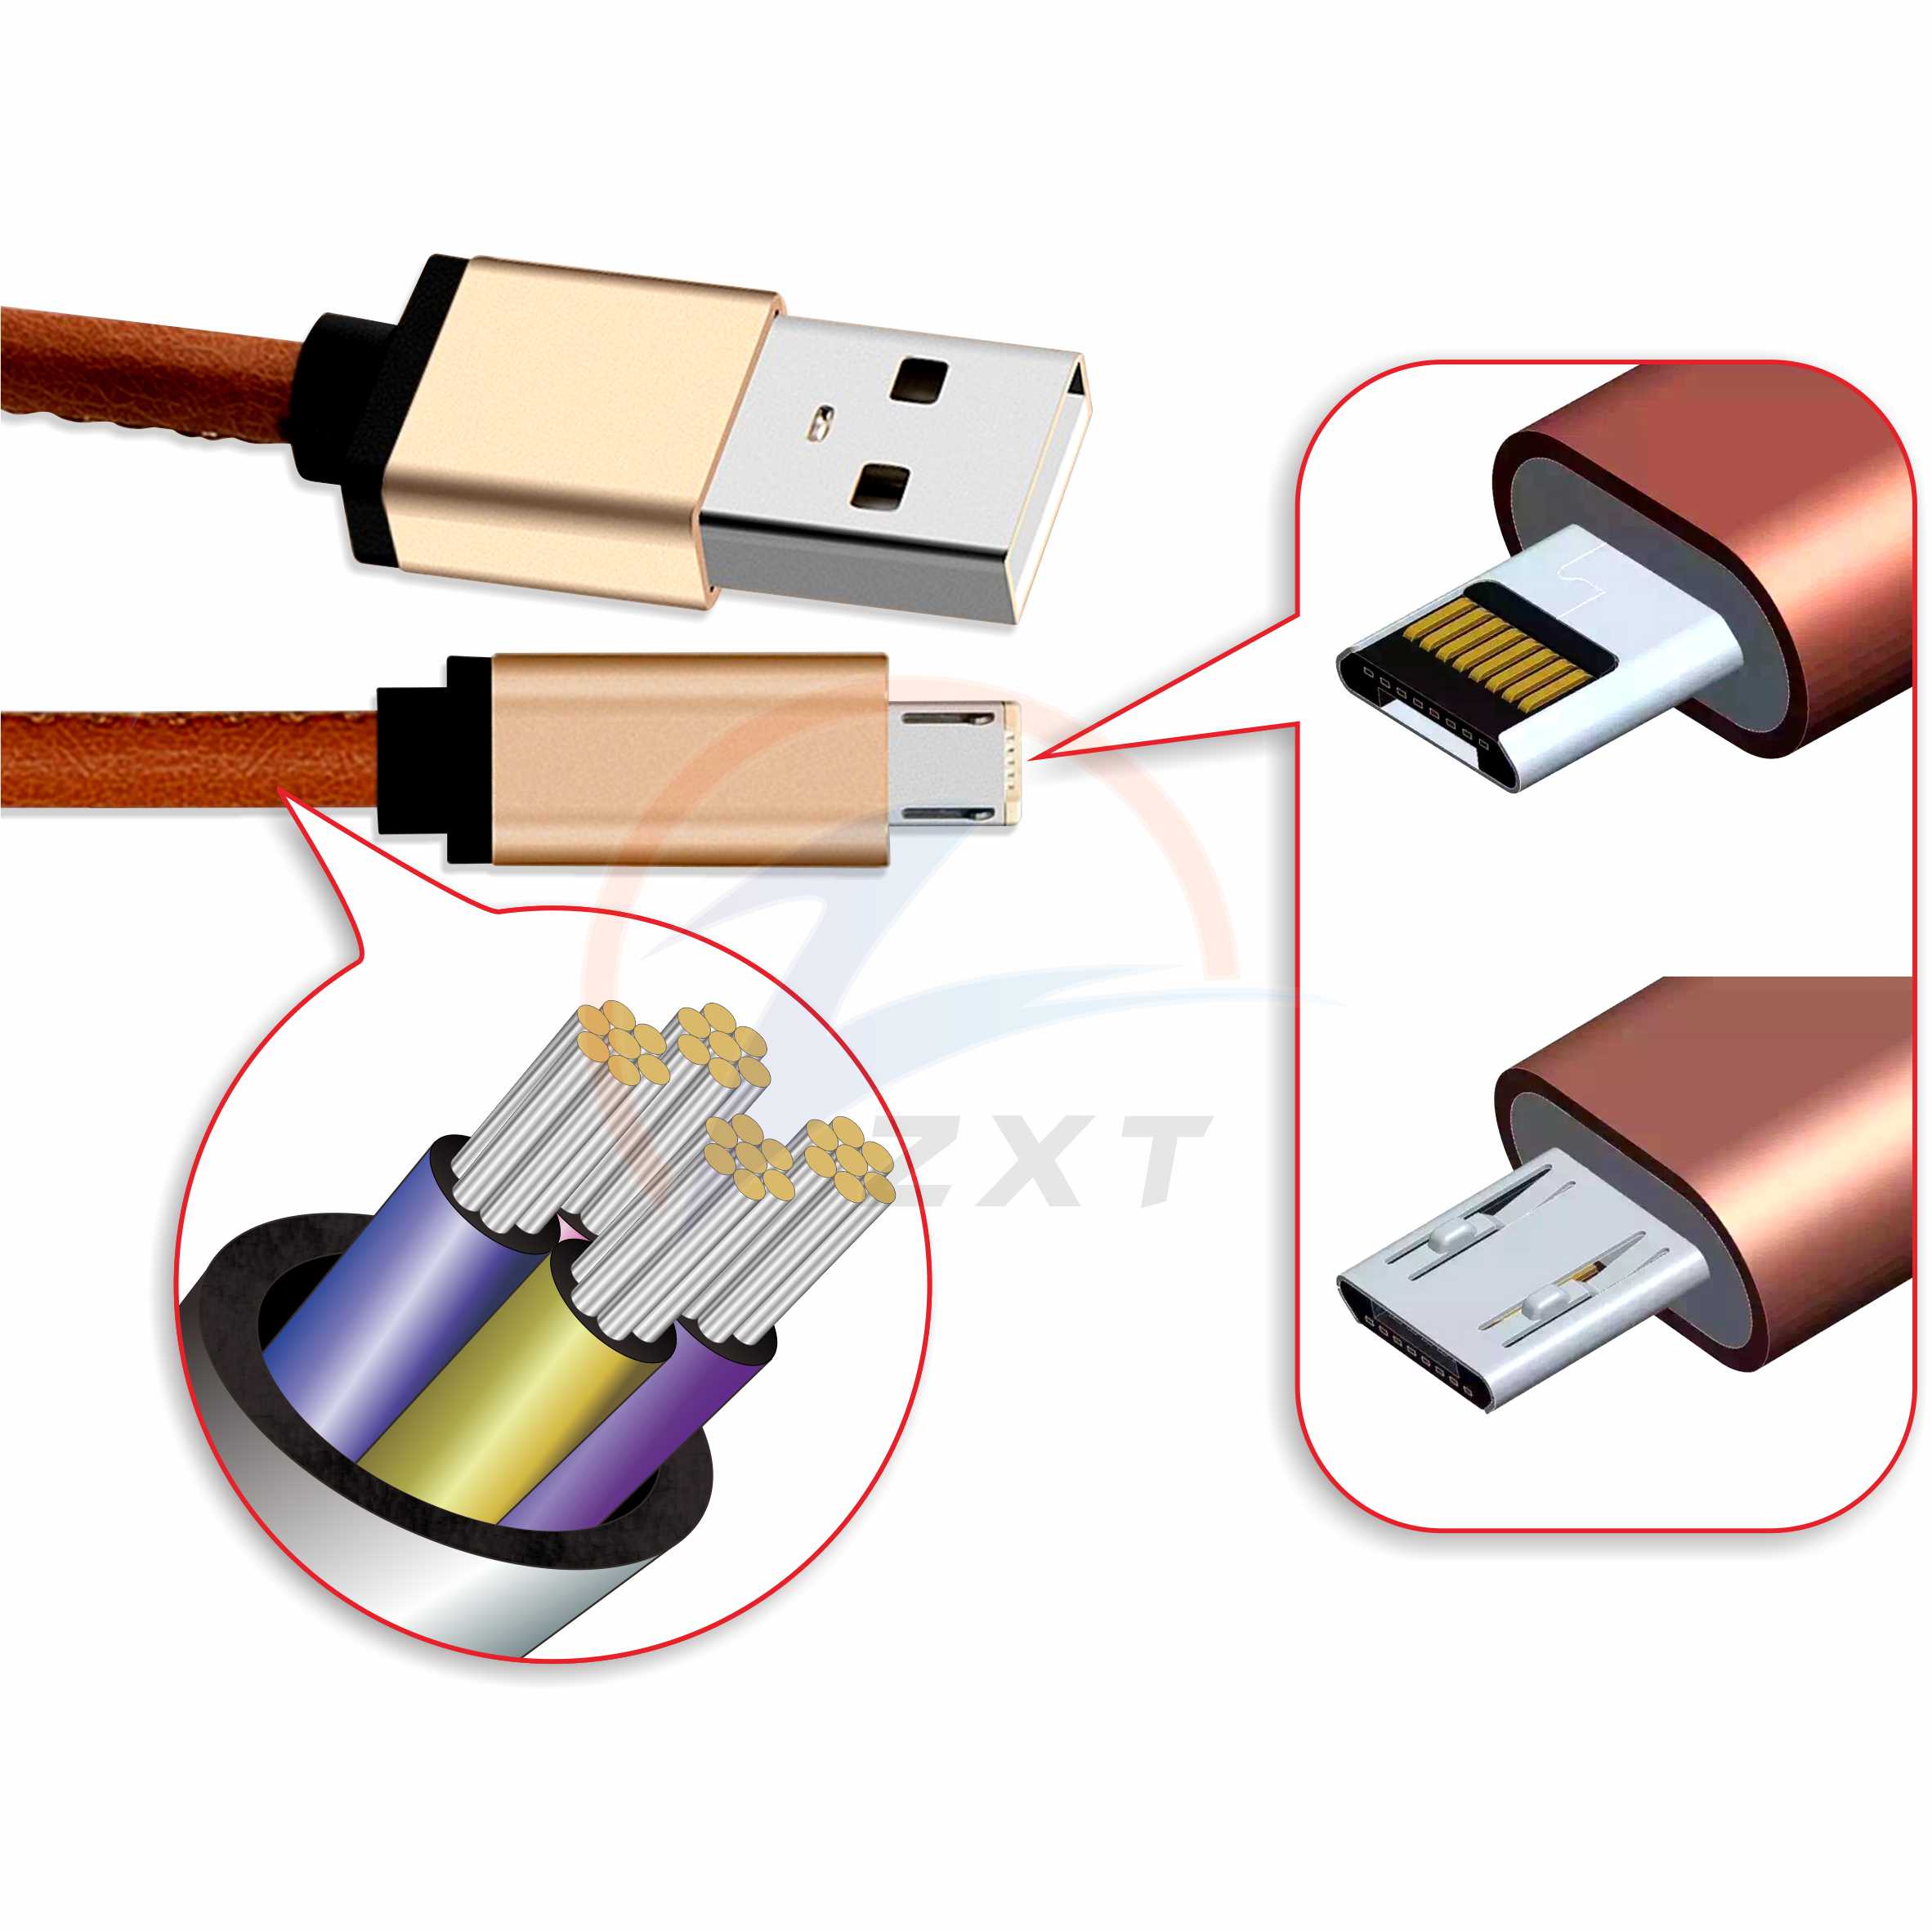 2 in 1 LM Leather Cable For Android & IOS